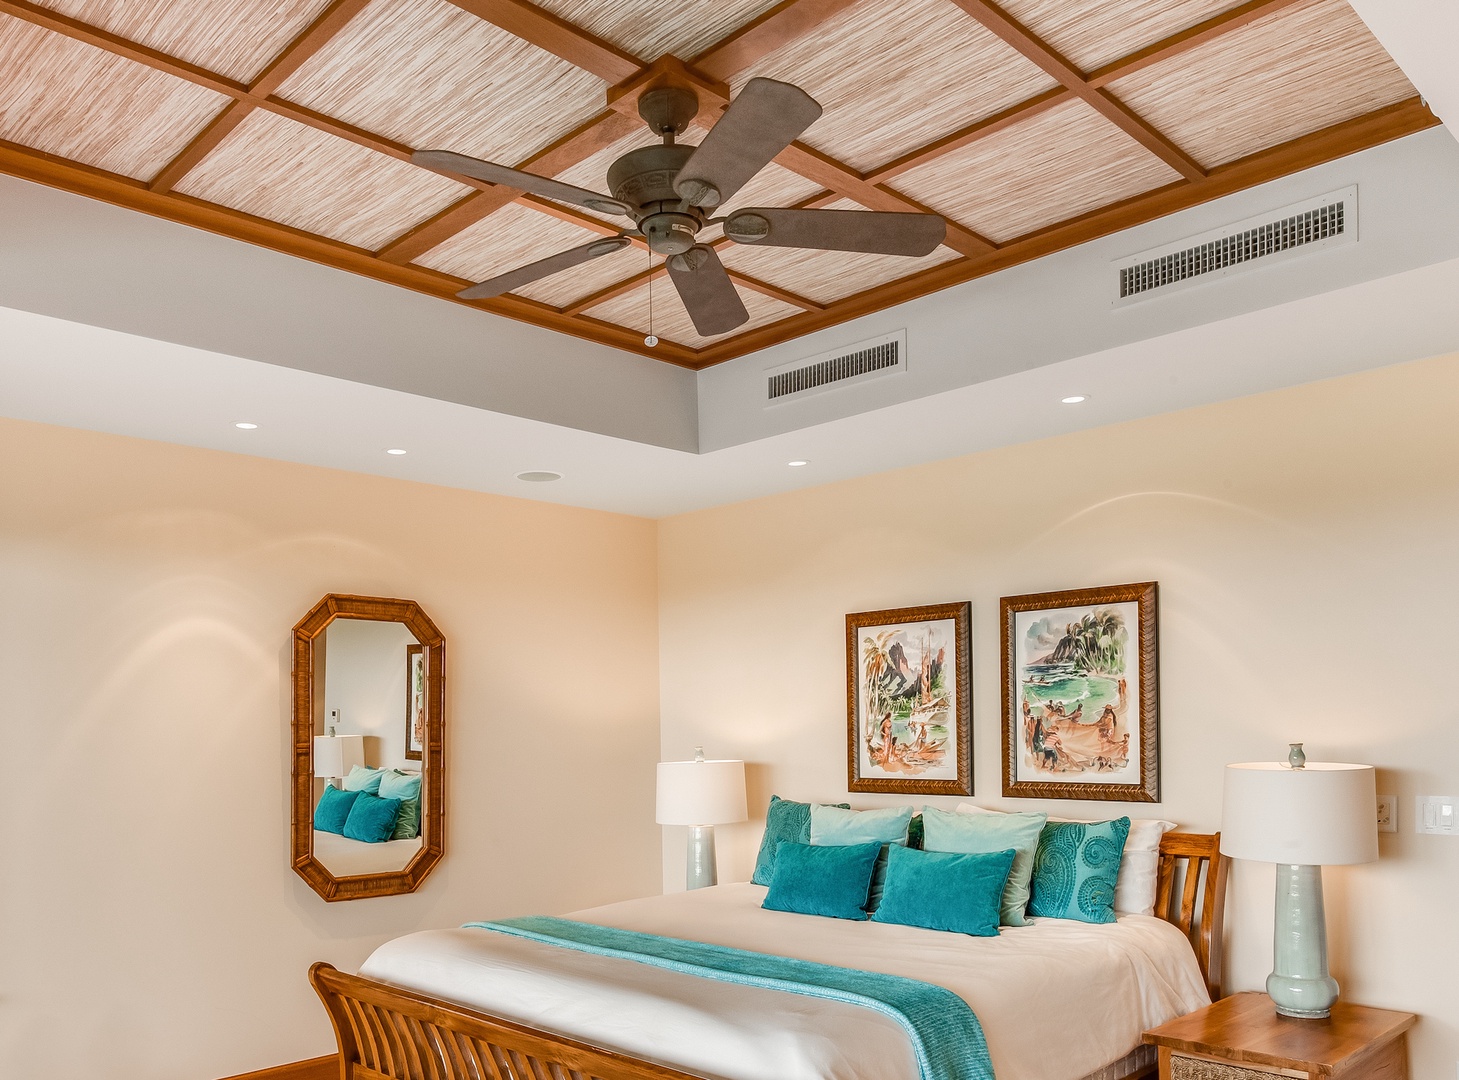 Kamuela Vacation Rentals, 3BD OneOcean (1C) at Mauna Lani Resort - Downstairs Primary w/King Bed, Vaulted Ceilings, Smart Flatscreen TV & Ensuite Bath